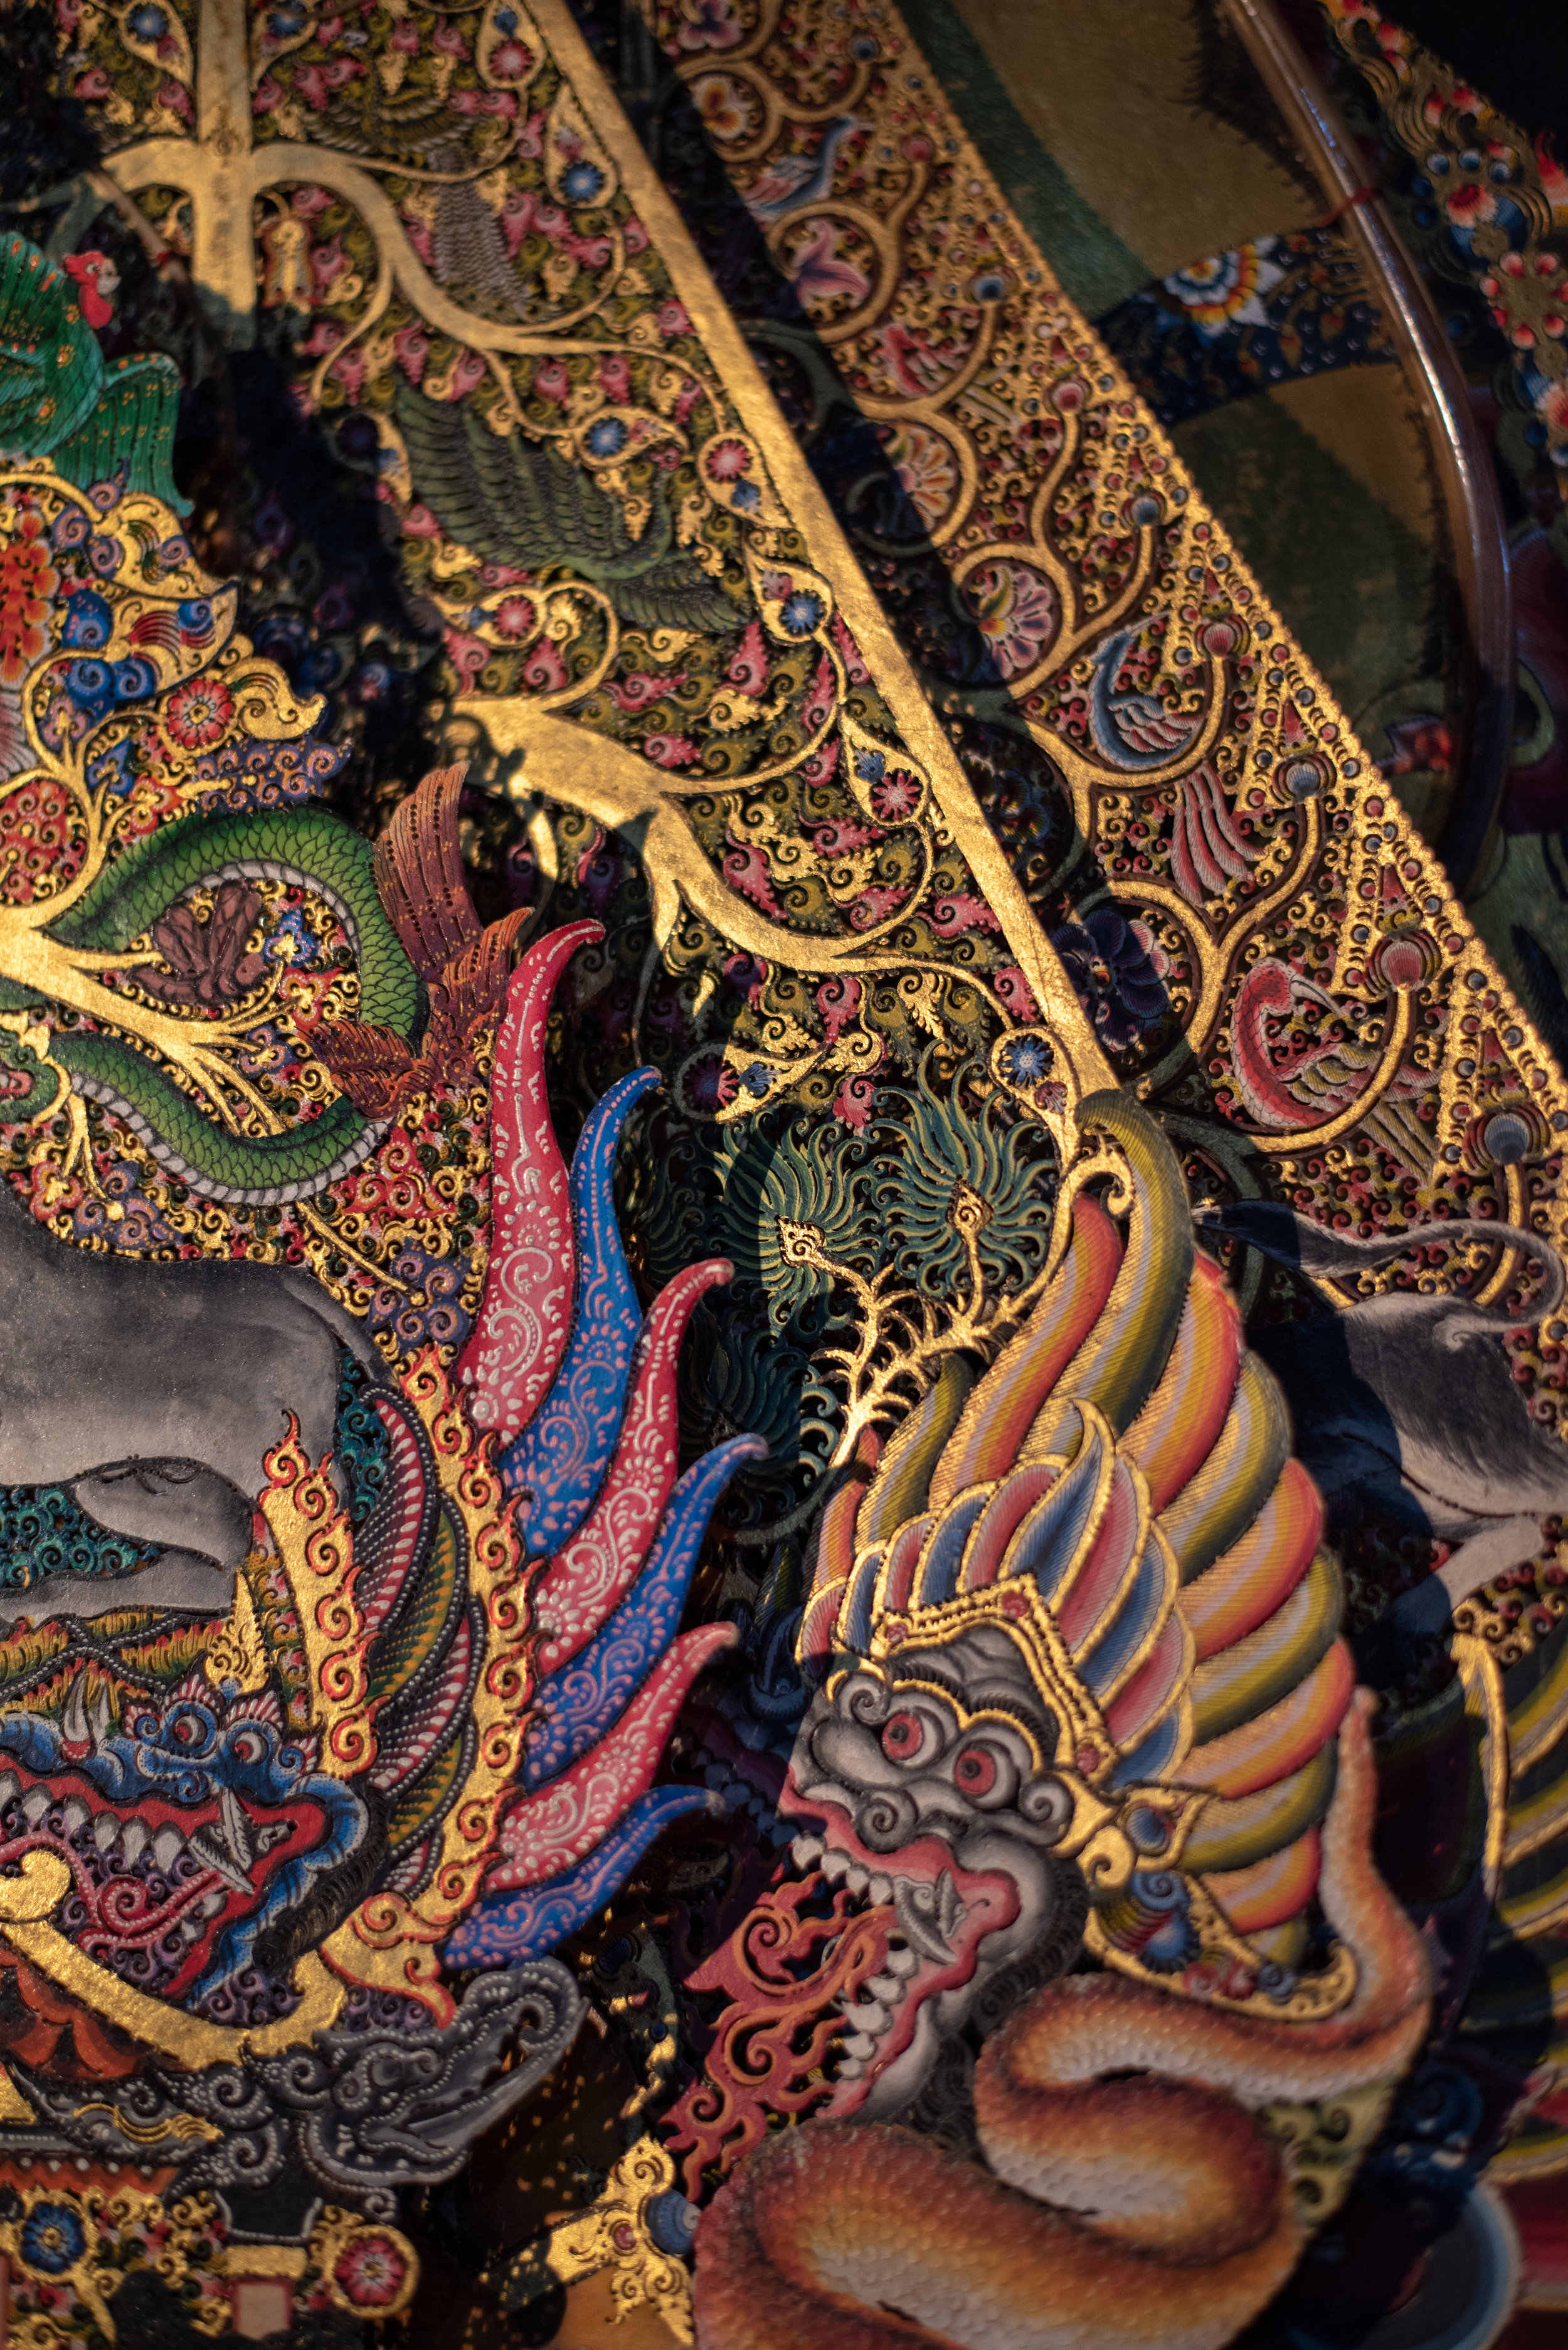  Ornate hand-painted shadow puppets known as Gunungan 